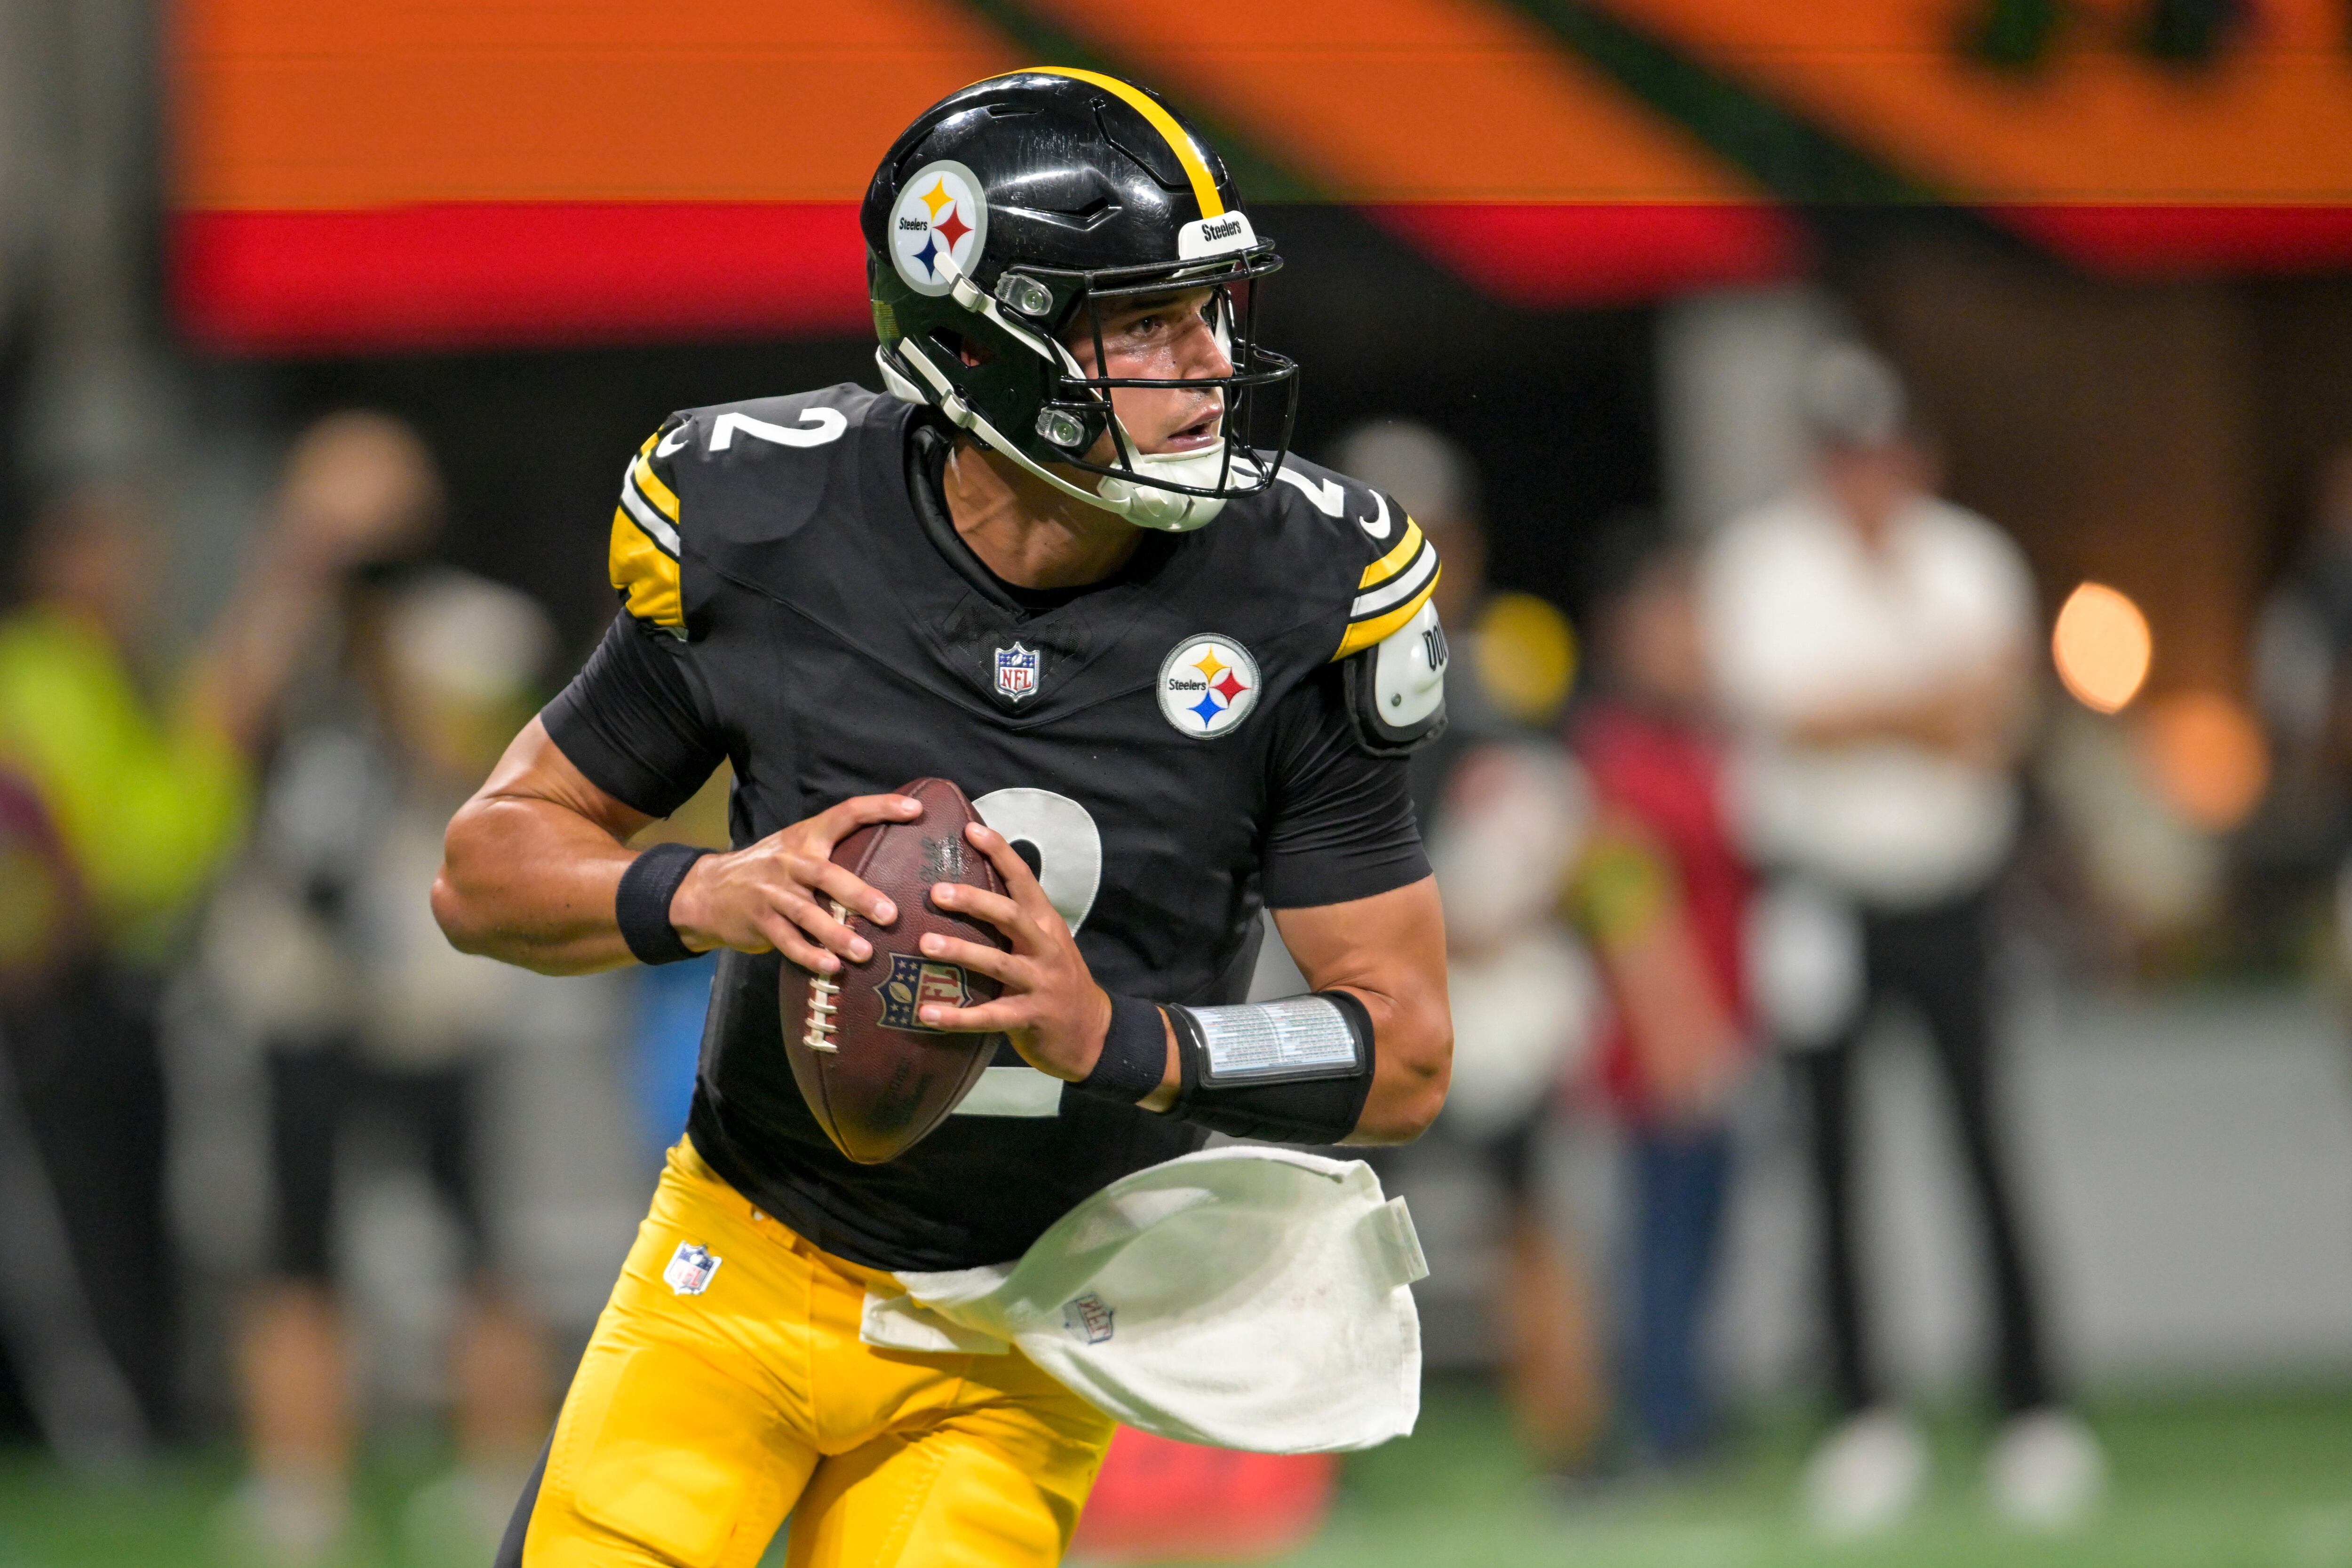 Kenny Pickett and the Steelers' starters cap an impressive preseason in a  win over the Falcons